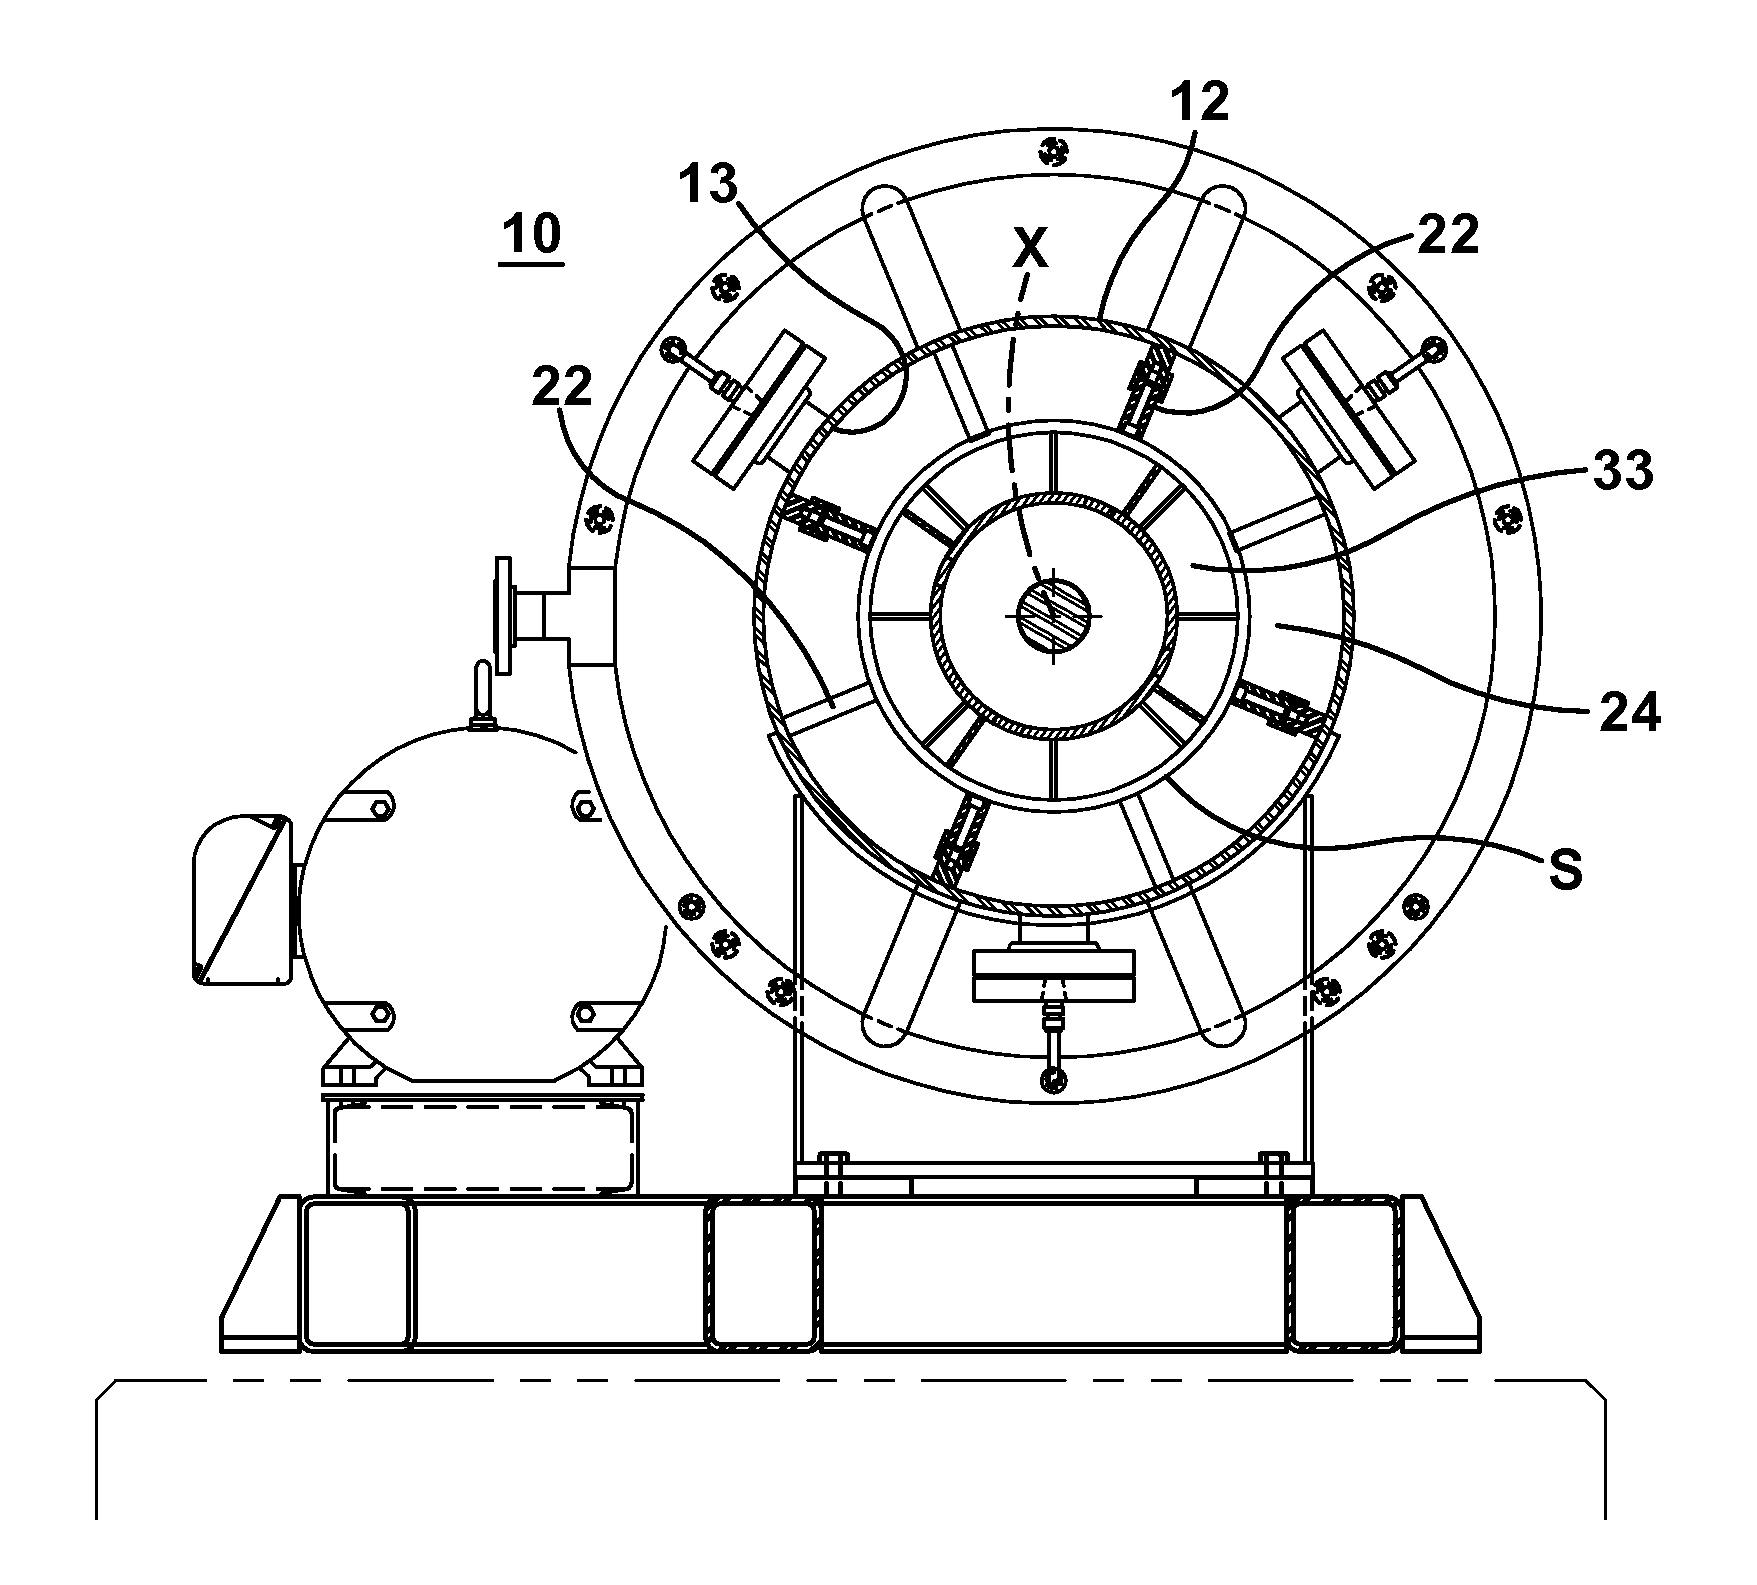 Dynamic mixing assembly with improved baffle design